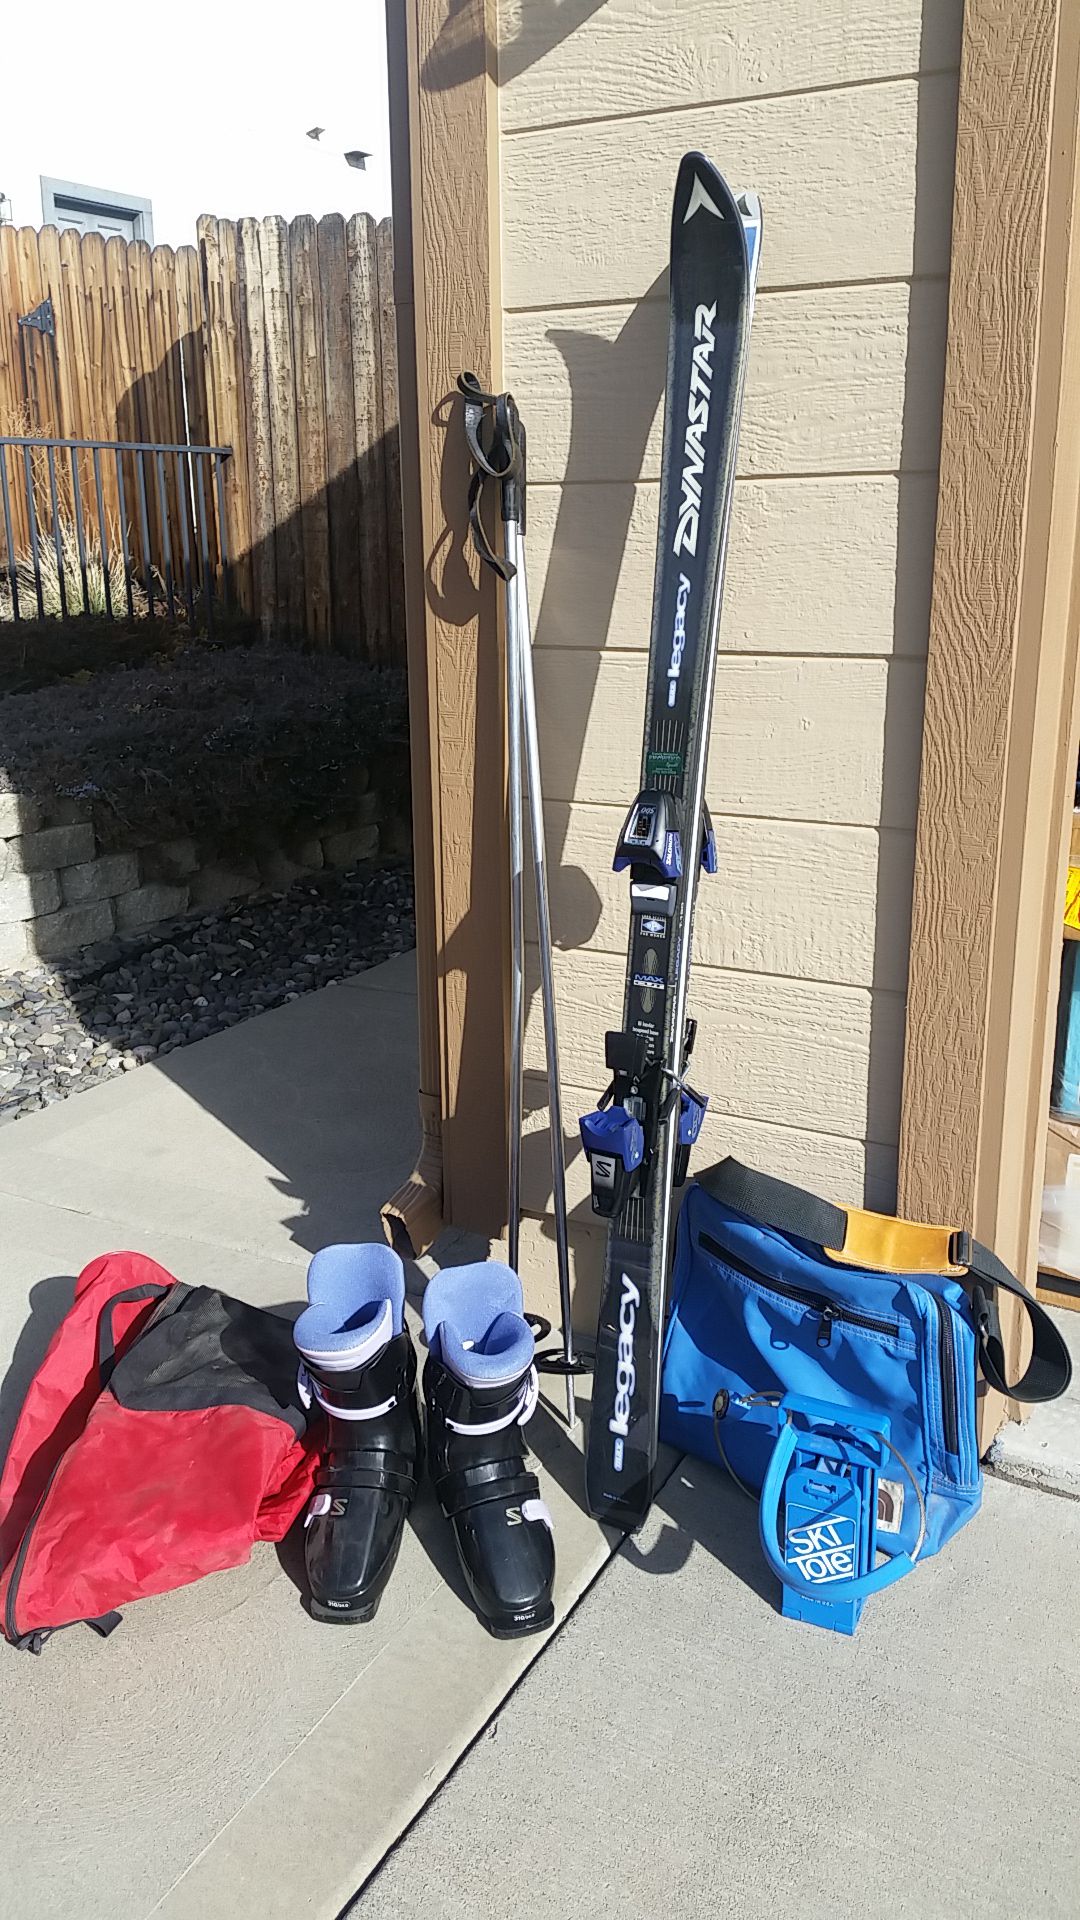 Skies,boots,poles,tote and cover